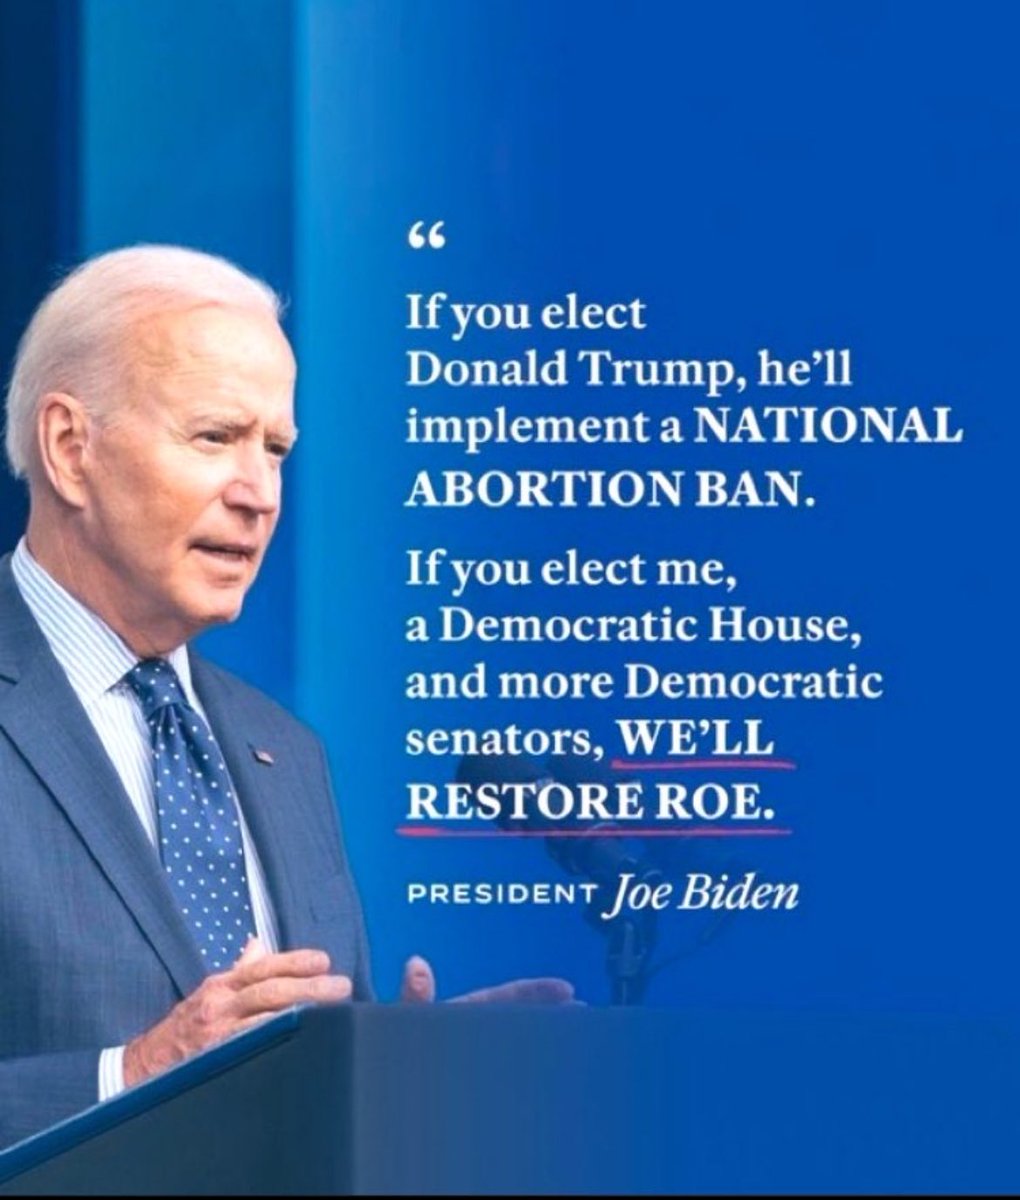 @TeamPelosi @azdemparty @nvdems Re-elect #BidenHarris and on ELECTION DAY NOVEMBER 5 🗳️ VOTE ONLY FOR DEMOCRATS ⬆️&⬇️ THE BALLOT‼️